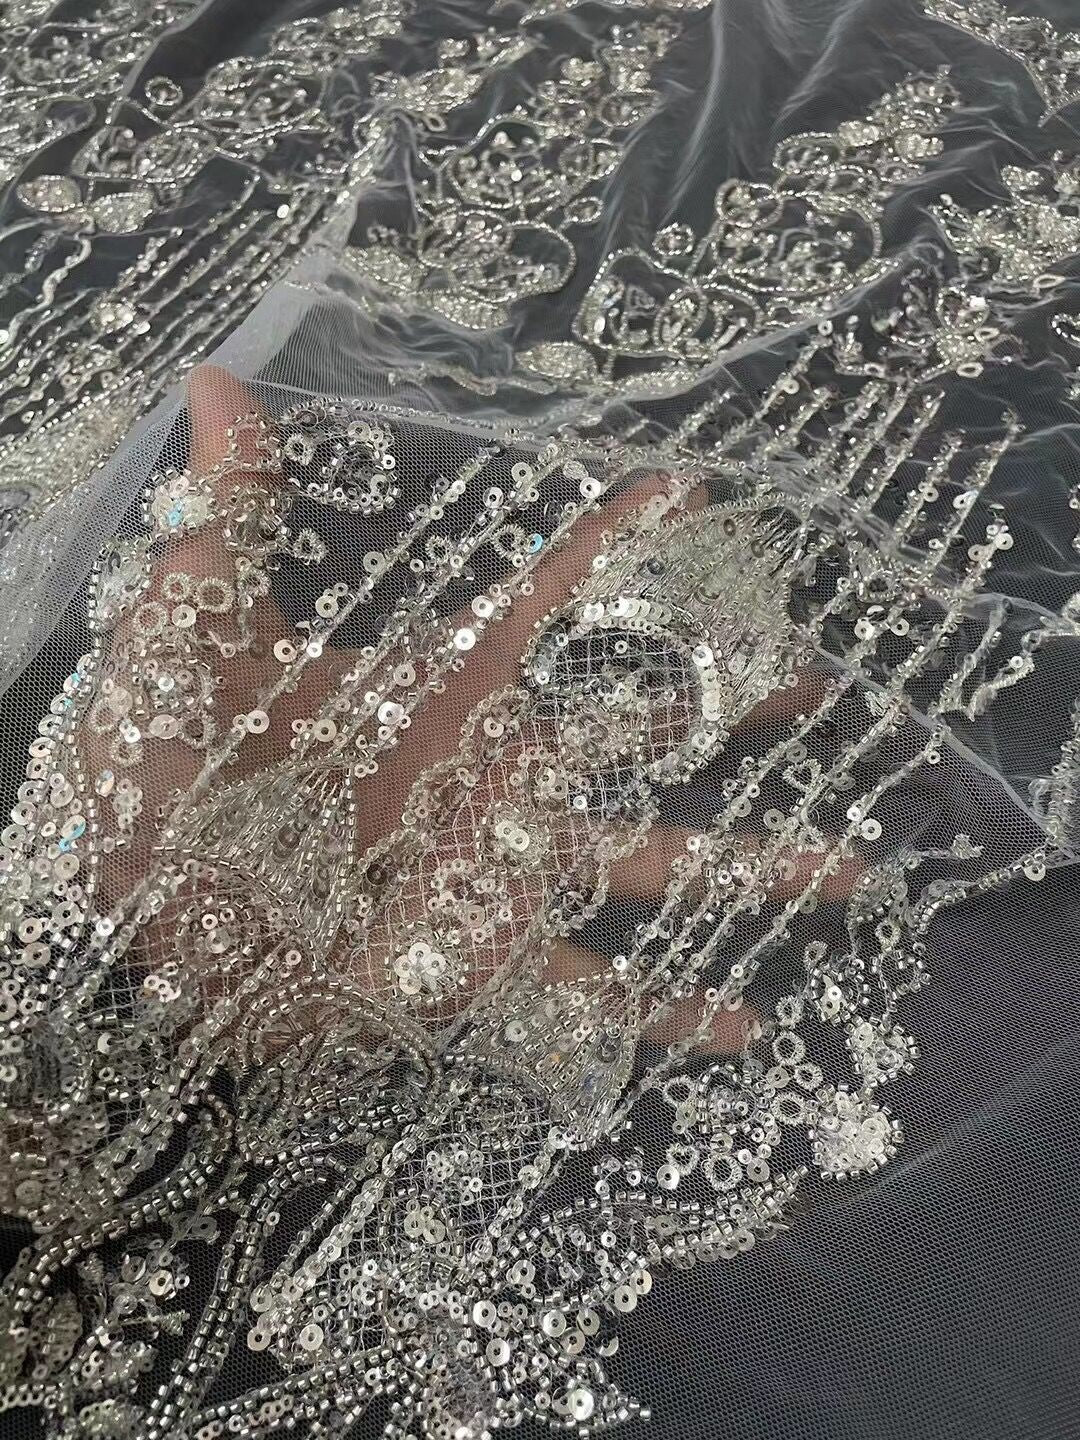 5 YARDS / 4 COLORS / Floral Beaded Glitter Embroidery Mesh Lace Wedding Party Dress Fabric - Classic & Modern